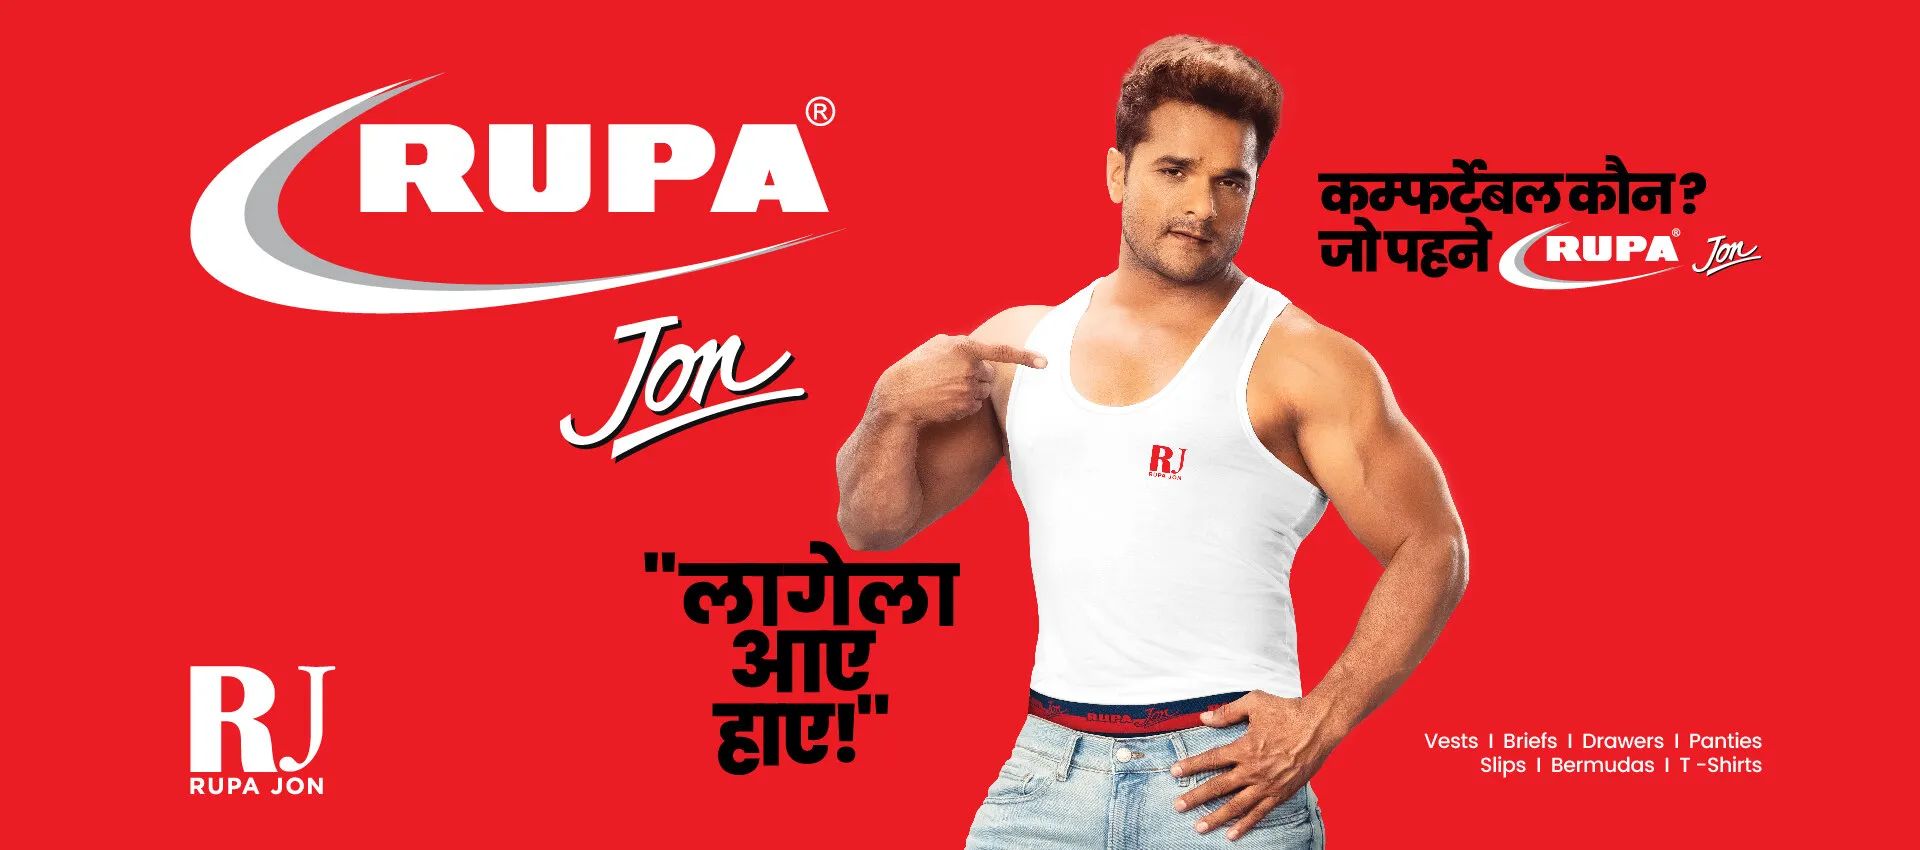 Rupa Jon India - Buy Rupa Jon Products Online at Best Prices from